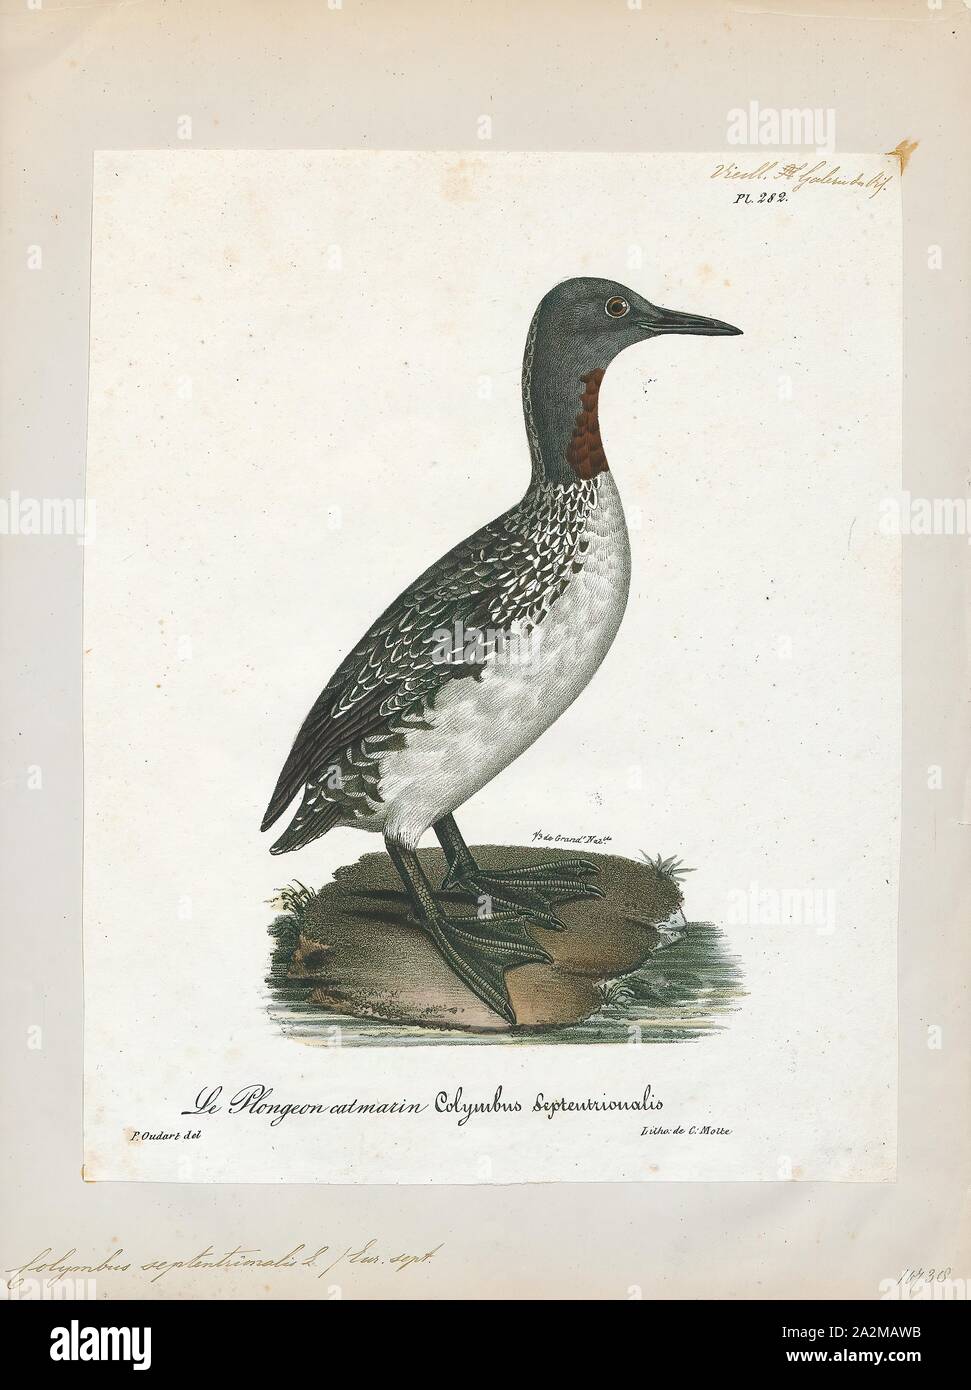 Colymbus septentrionalis, Print, The red-throated loon (North America) or red-throated diver (Britain and Ireland) (Gavia stellata) is a migratory aquatic bird found in the northern hemisphere. The most widely distributed member of the loon or diver family, it breeds primarily in Arctic regions, and winters in northern coastal waters. Ranging from 55 to 67 centimetres (22 to 26 in) in length, the red-throated loon is the smallest and lightest of the world's loons. In winter, it is a nondescript bird, greyish above fading to white below. During the breeding season, it acquires the distinctive Stock Photo